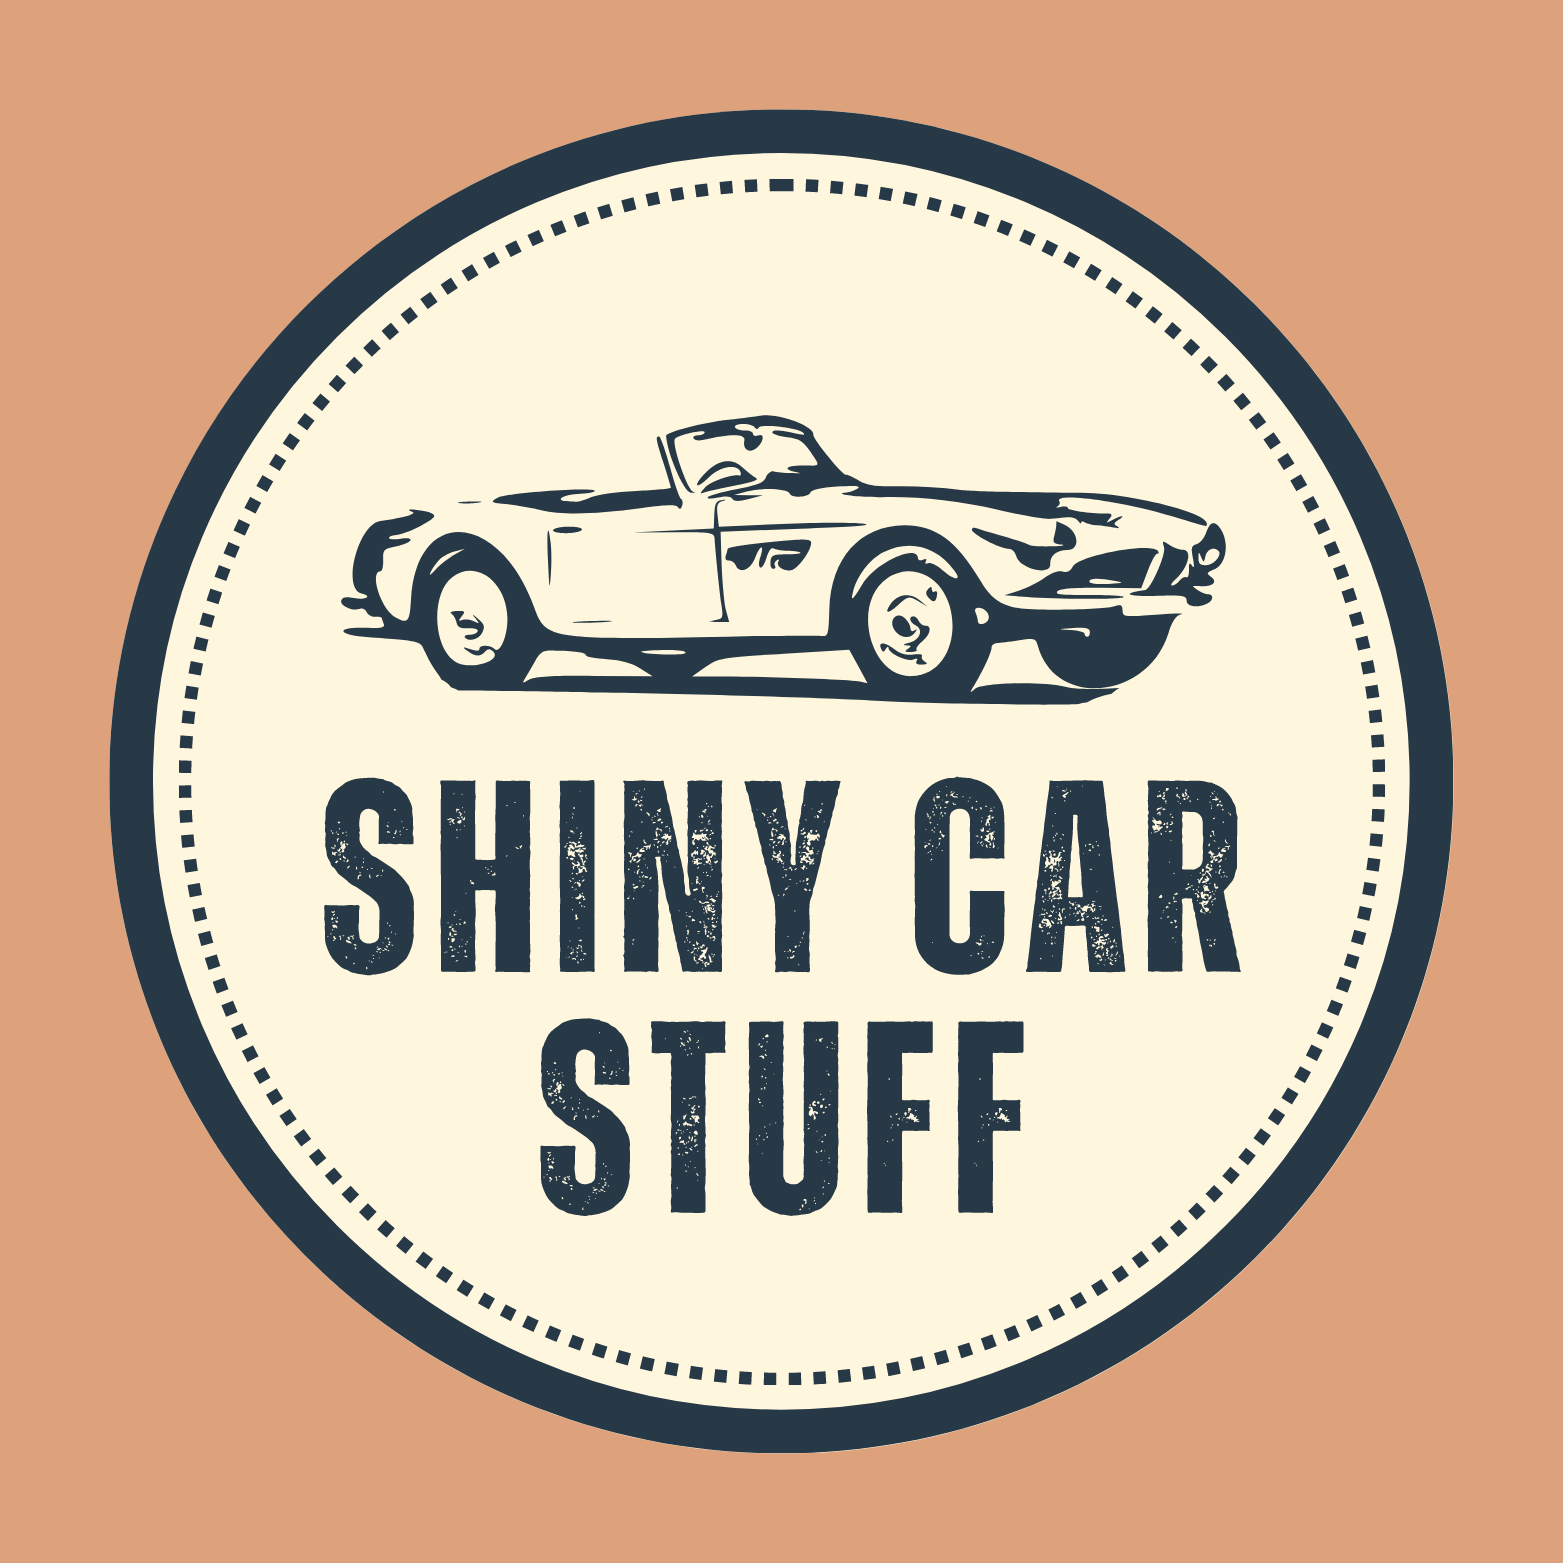 Shiny Car Stuff – At Shiny Car Stuff, We provide you with an